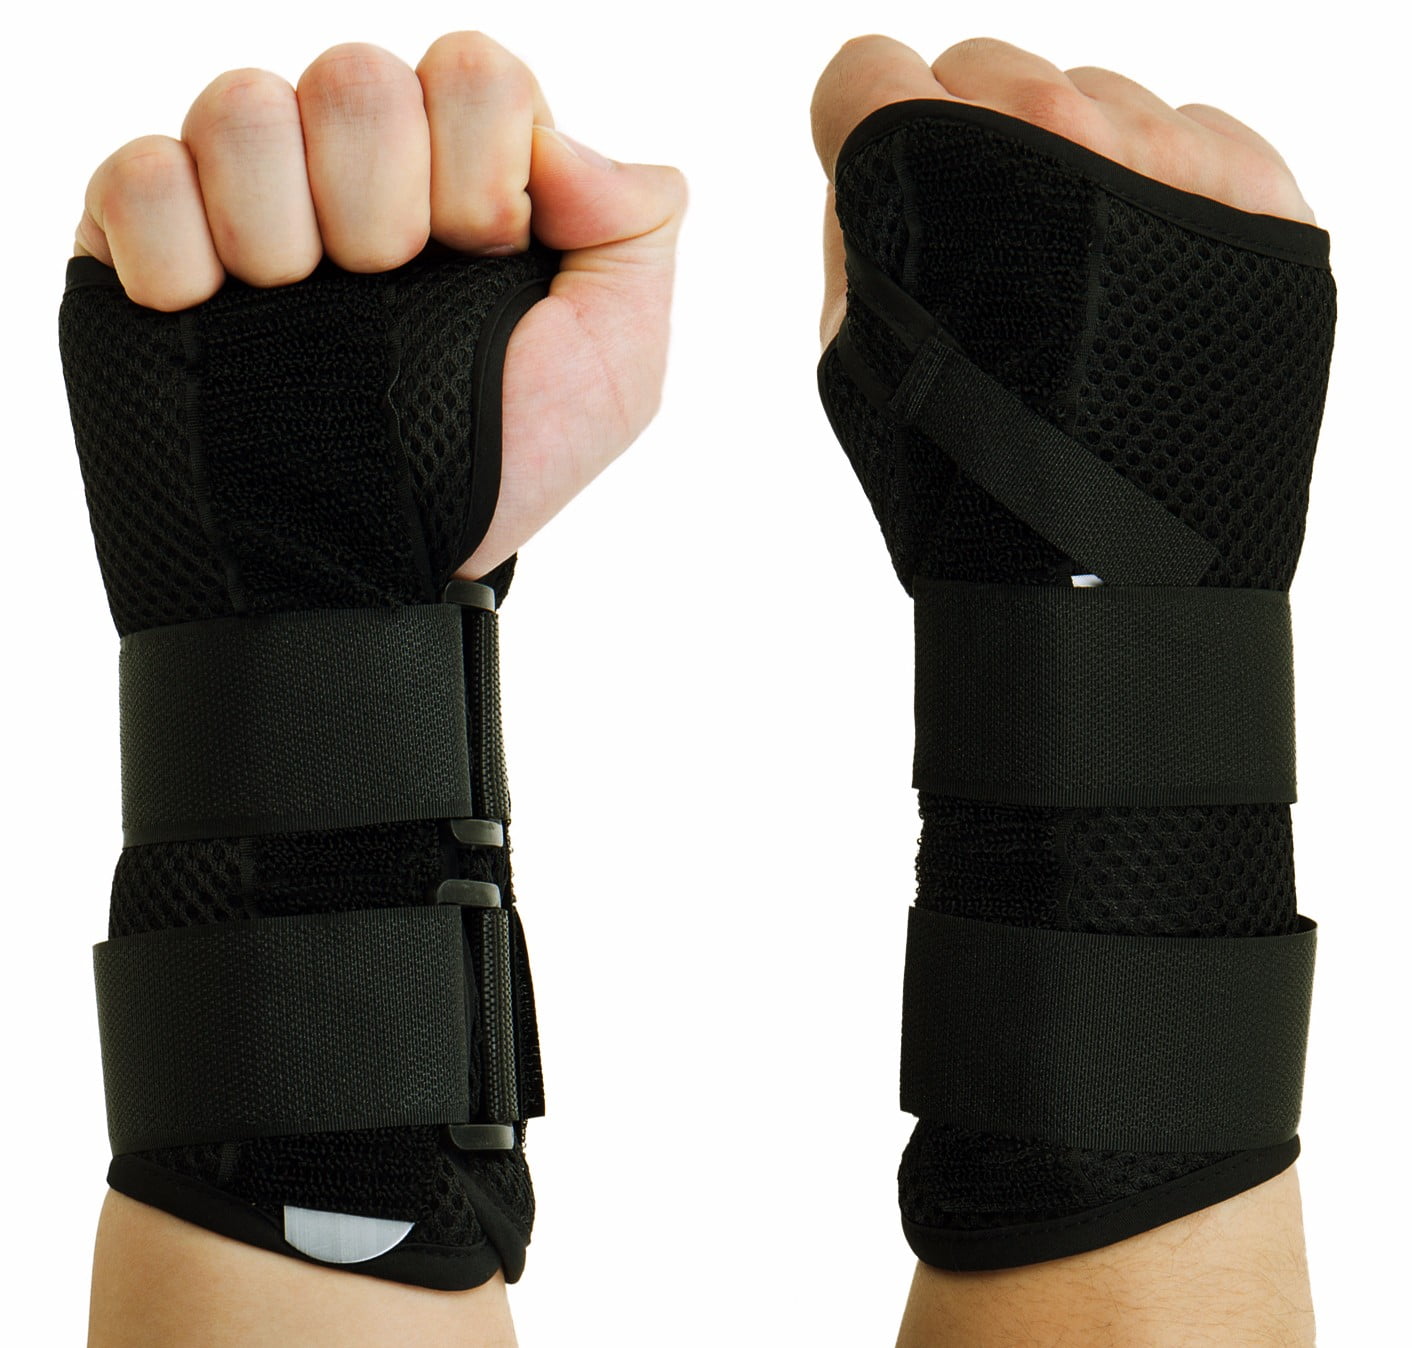 Right/SM JL Wrist Support Brace with Removable Splint Hand Wrap Relieve Carpal Tunnel Arthritis Tendonitis Sprains with Cushioned Pad for Women Men 